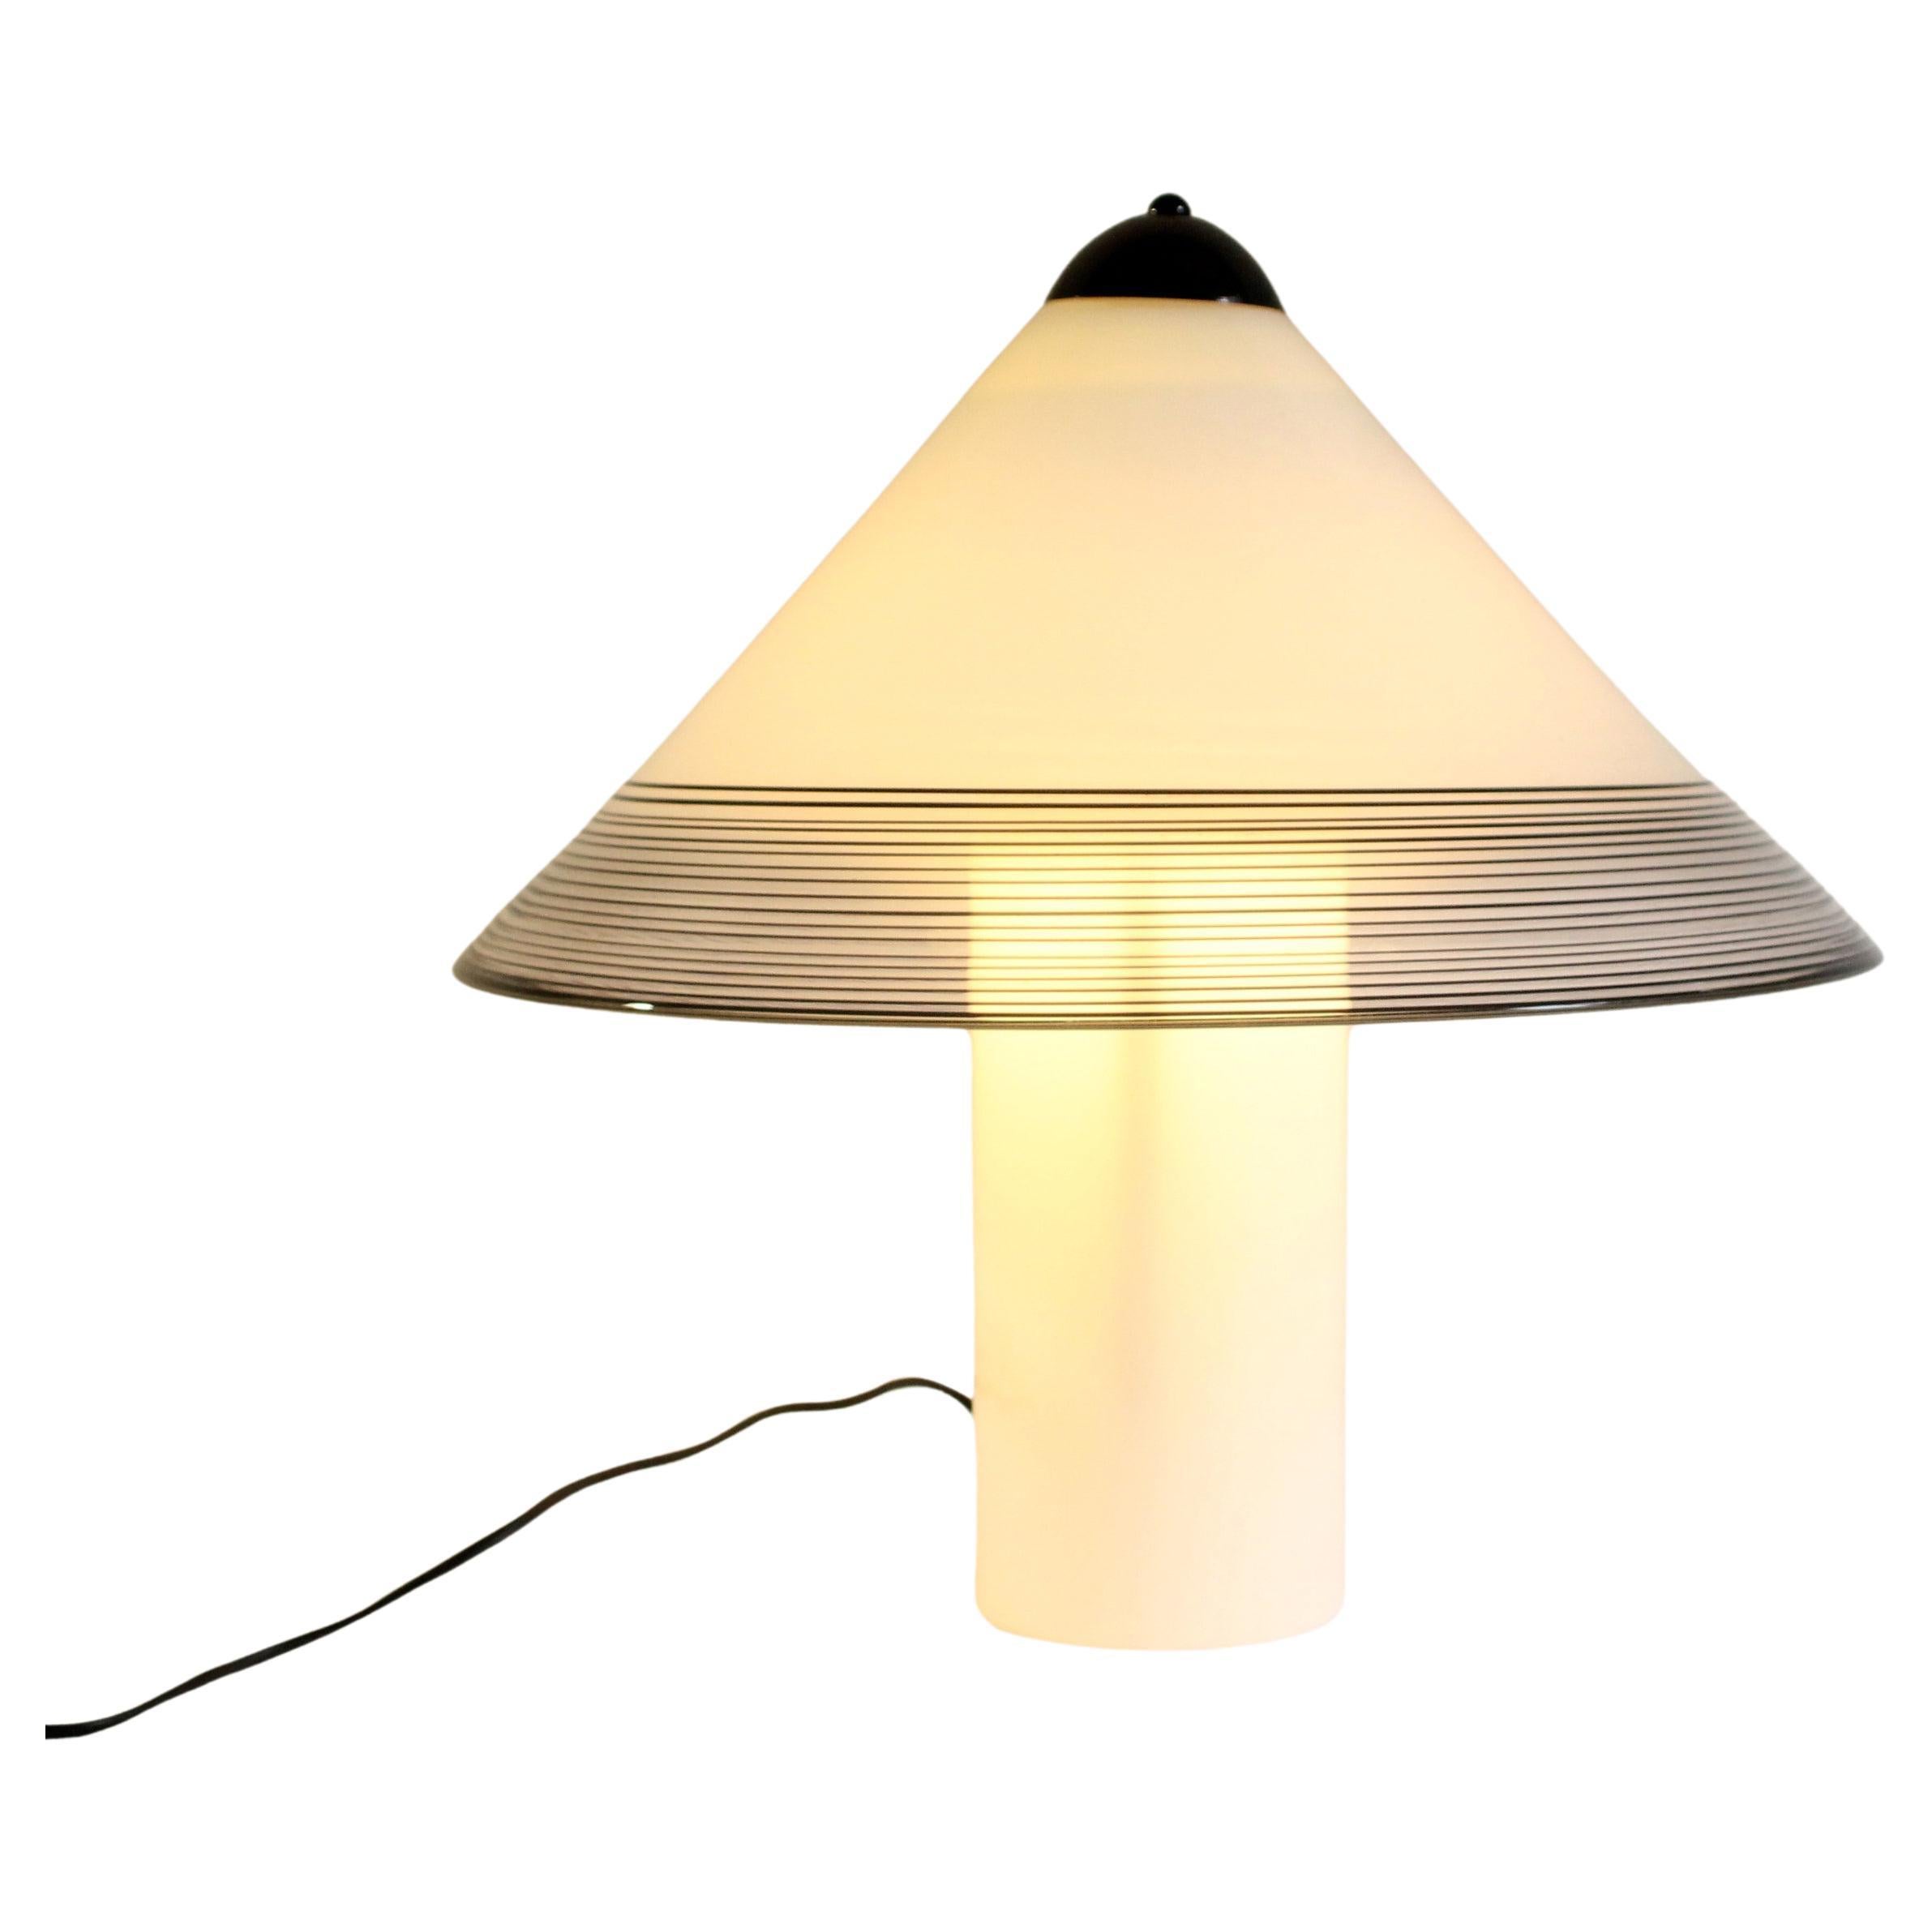 Large Murano table lamp by "iTRE" Murano (51Hx51cm) 1970s. Mid-century modern For Sale